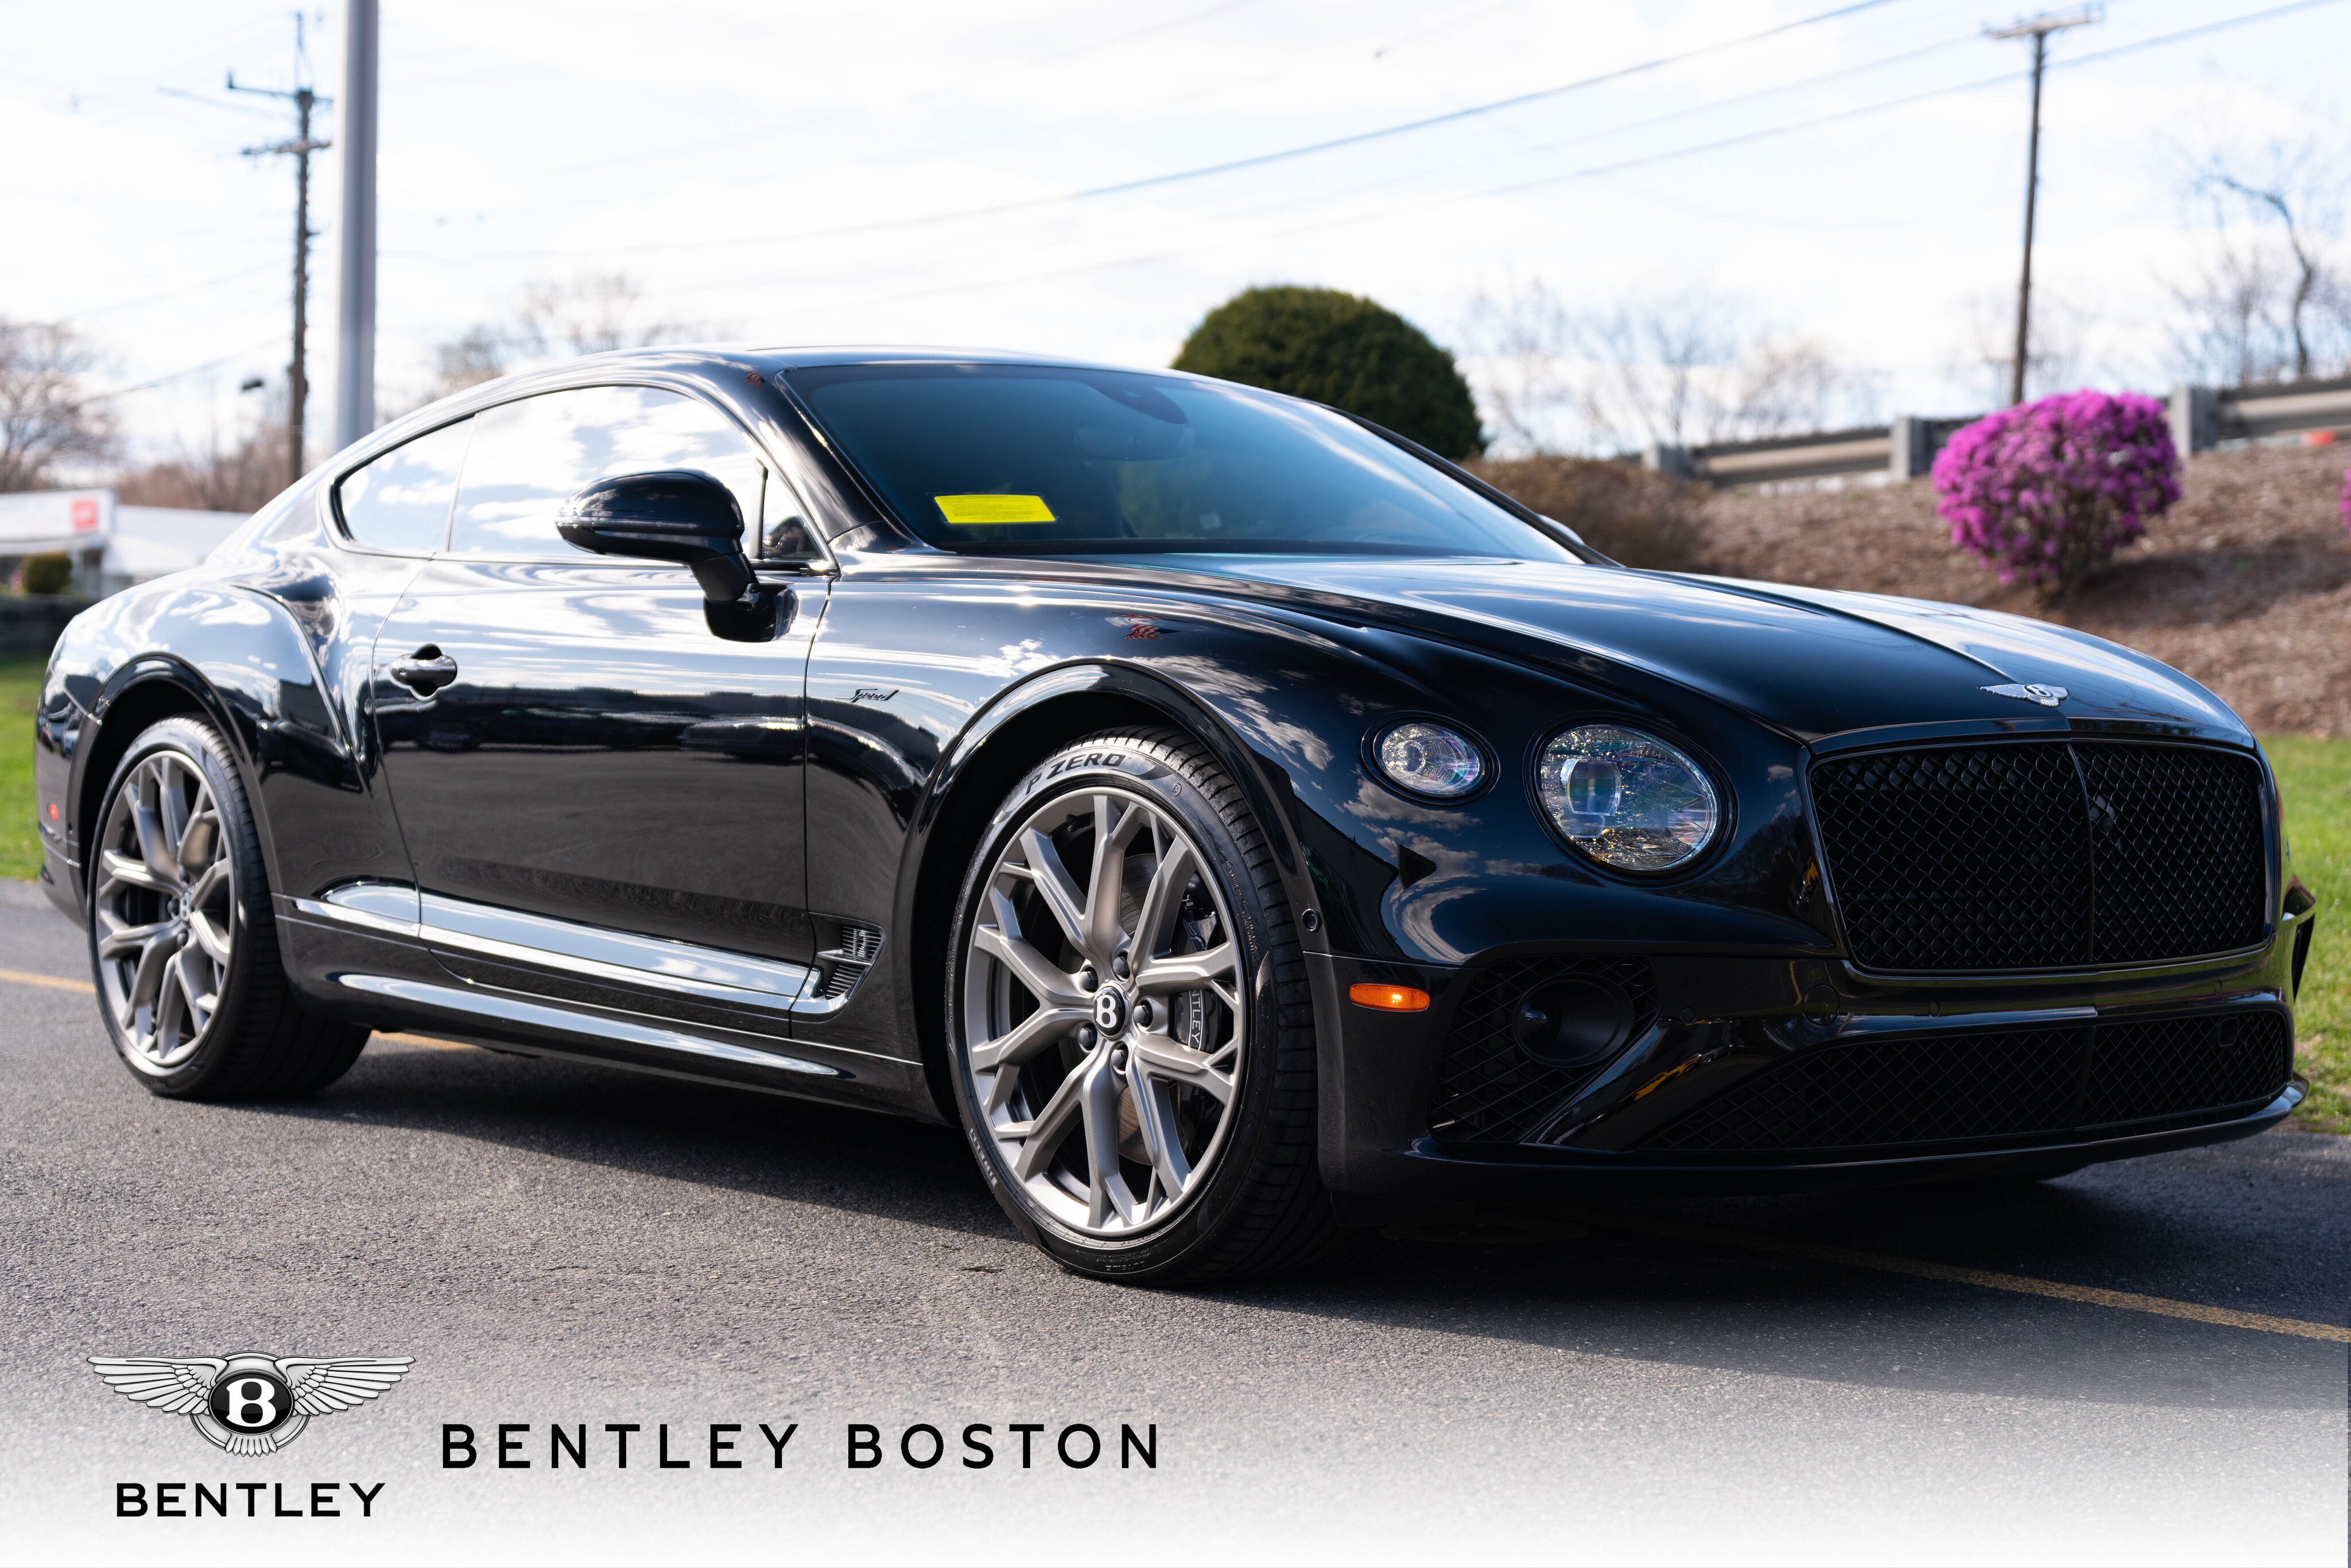 New 2024 Bentley Continental for sale in Wayland,MA| Near Boston 